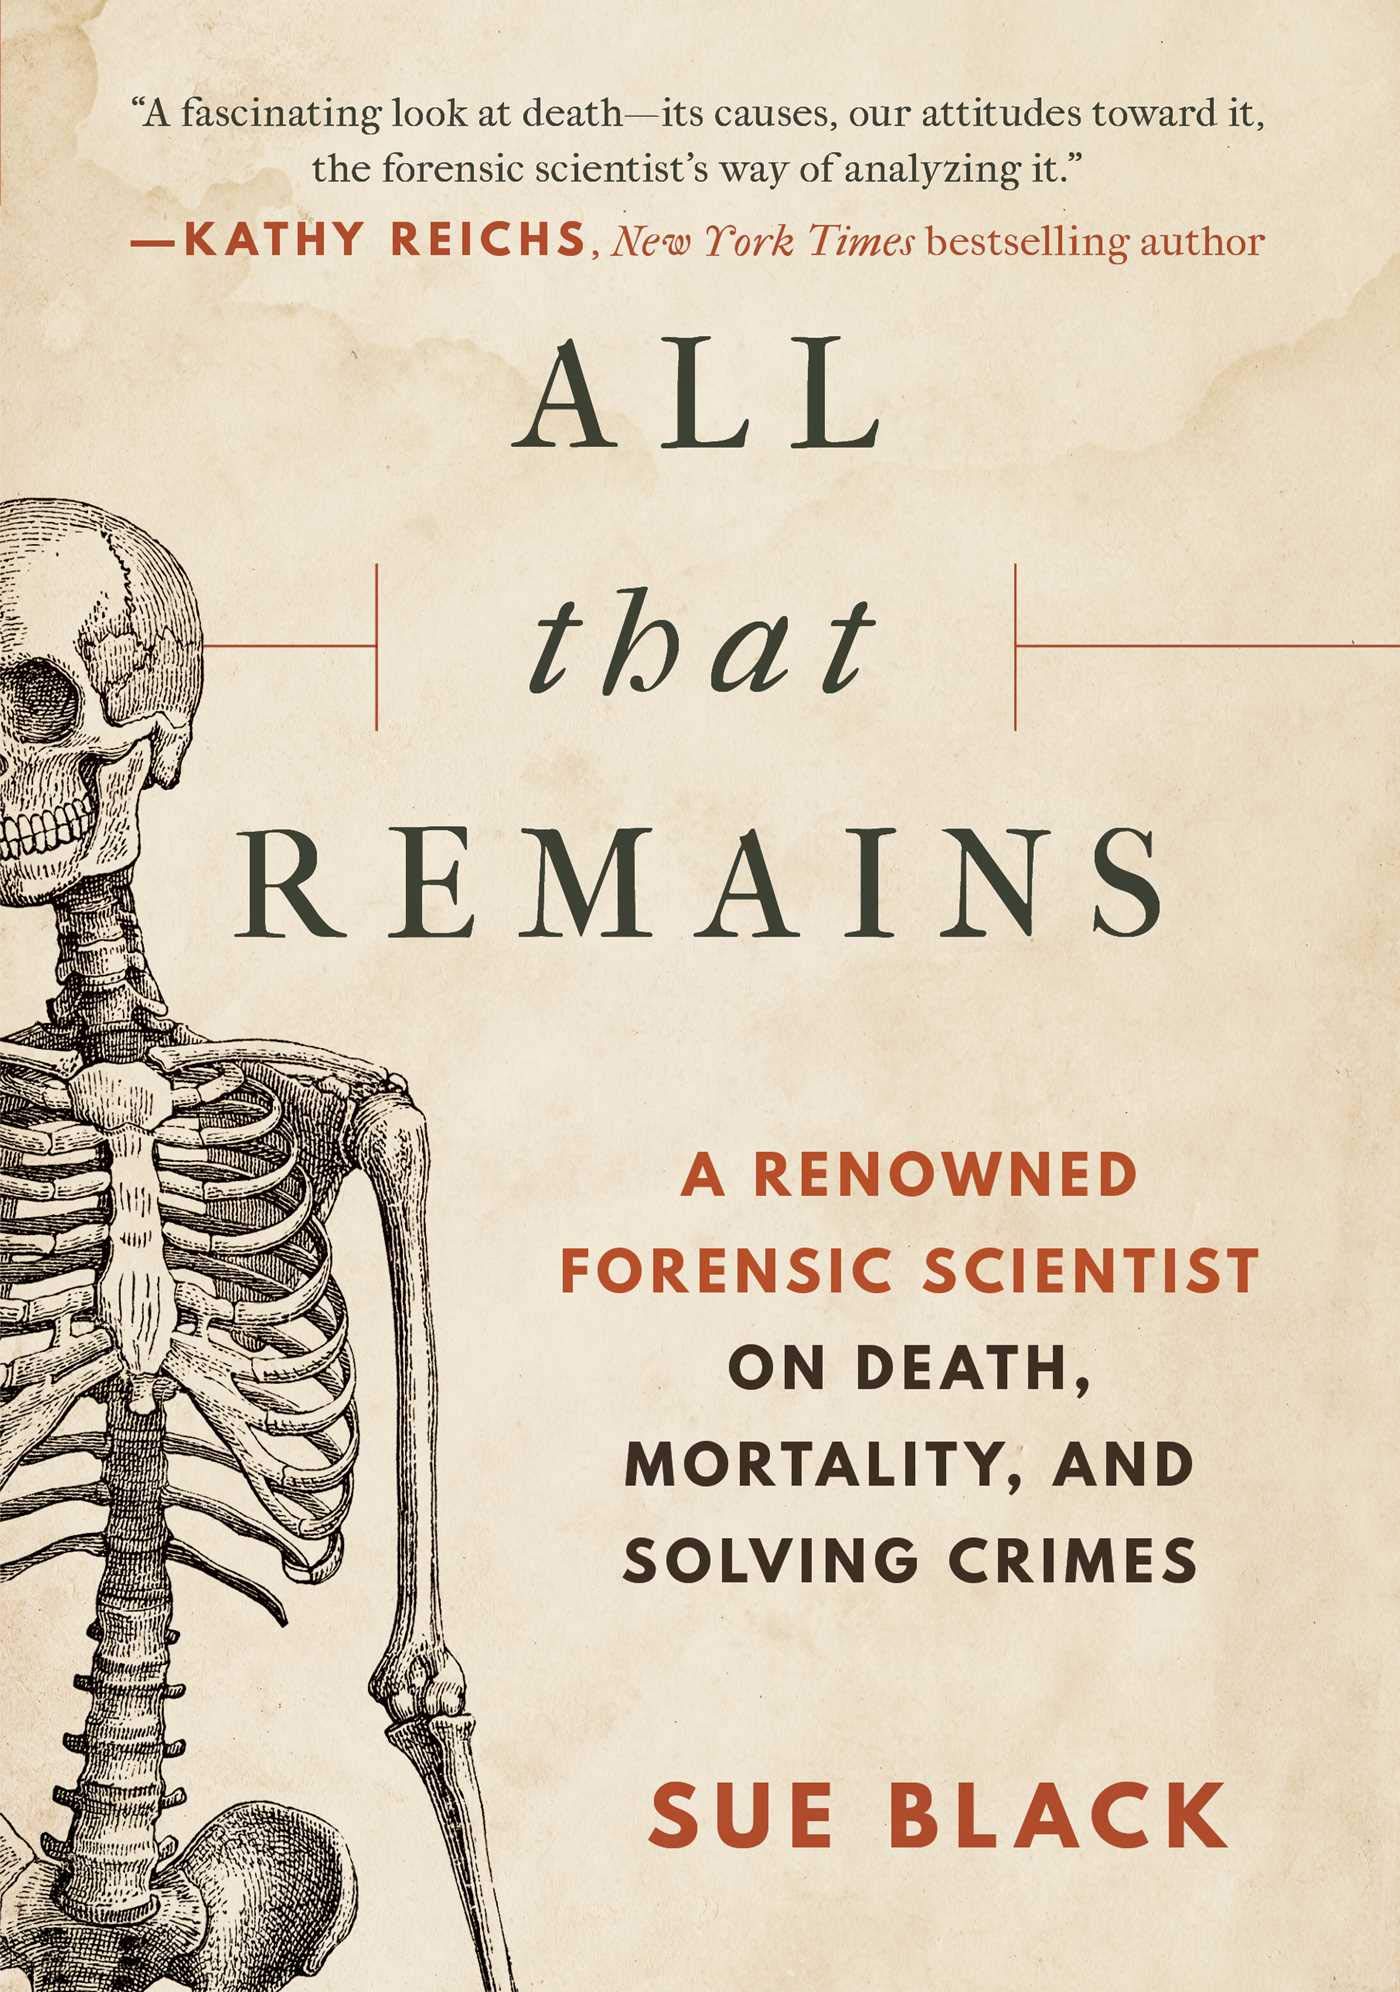 All That Remains: A Renowned Forensic Scientist on Death, Mortality, and Solving Crimes (eBook) by Sue Black $1.99